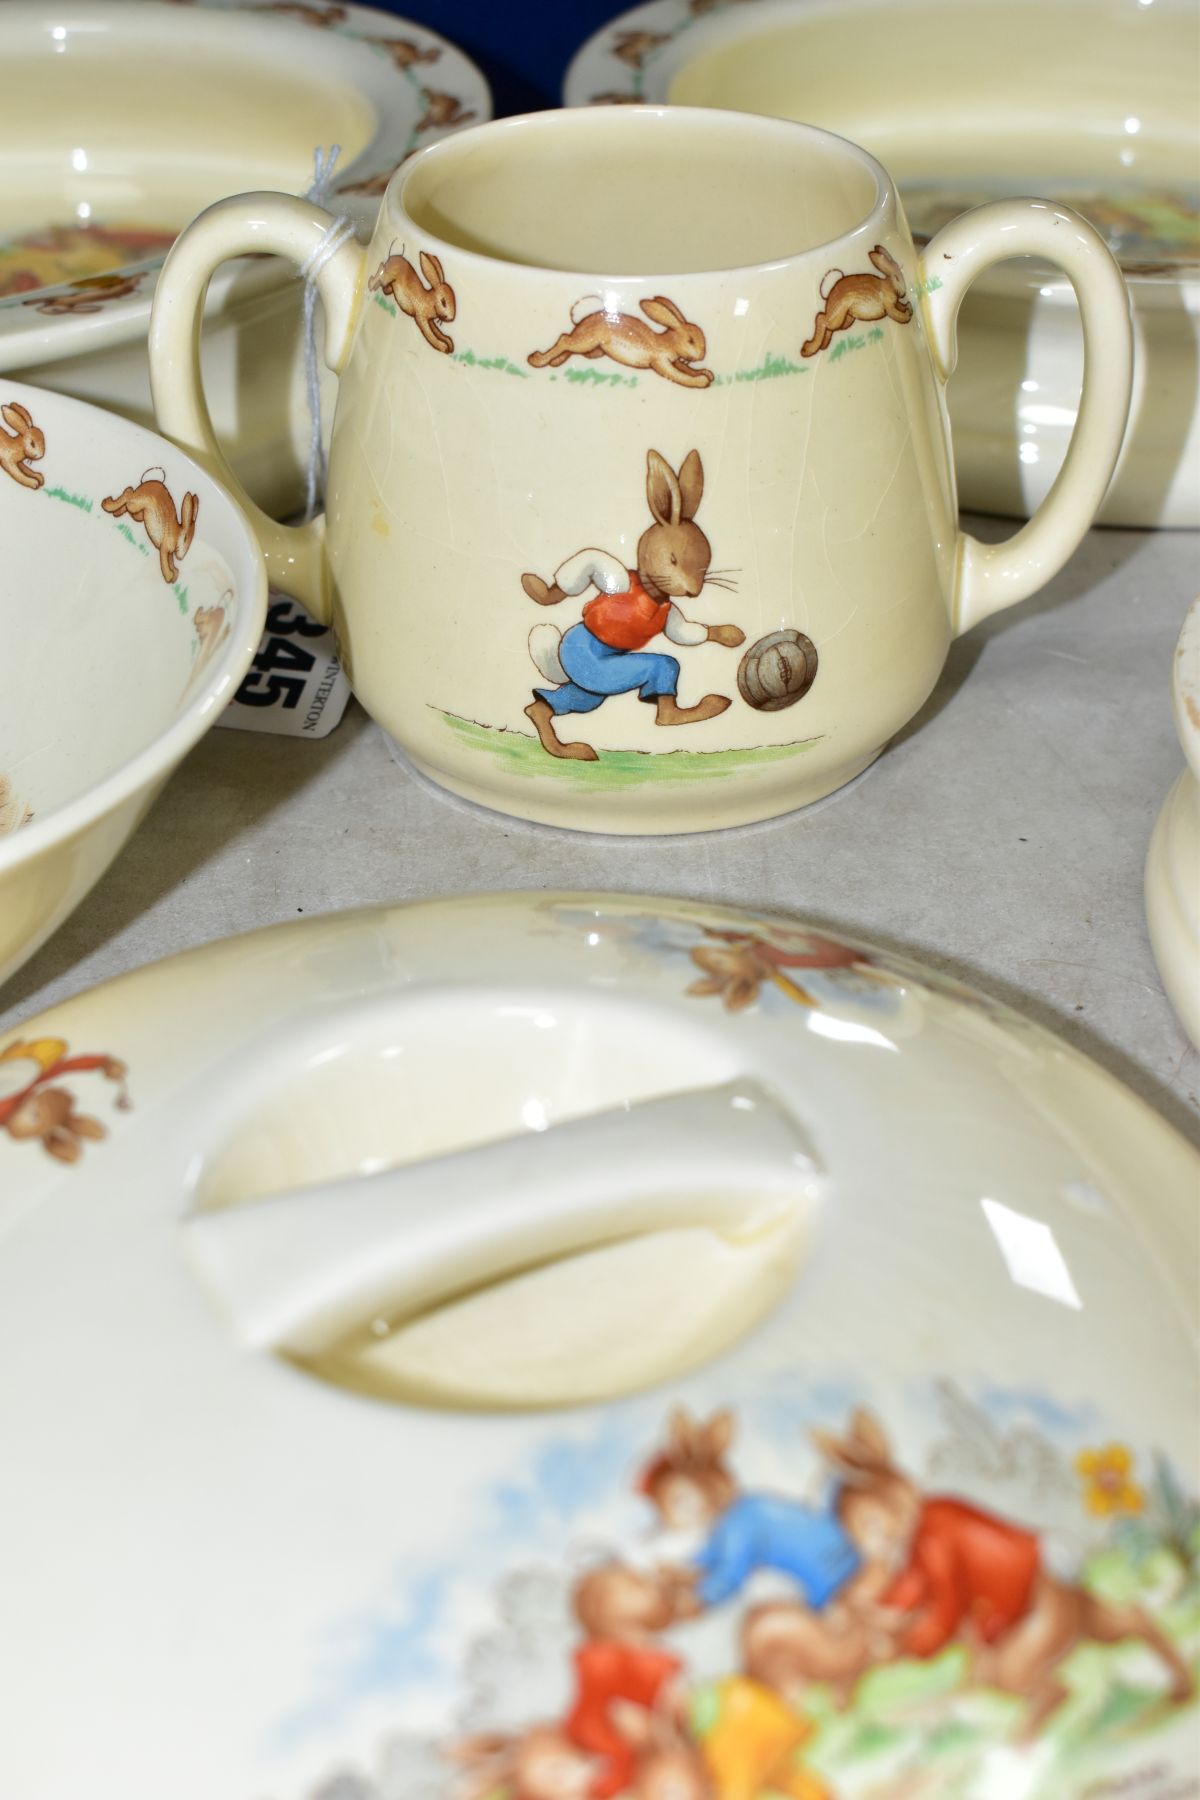 SIX PIECES OF ROYAL DOULTON BUNNYKINS EARTHENWARE TABLEWARES, DESIGNED BY BARBARA VERNON AND - Image 6 of 11